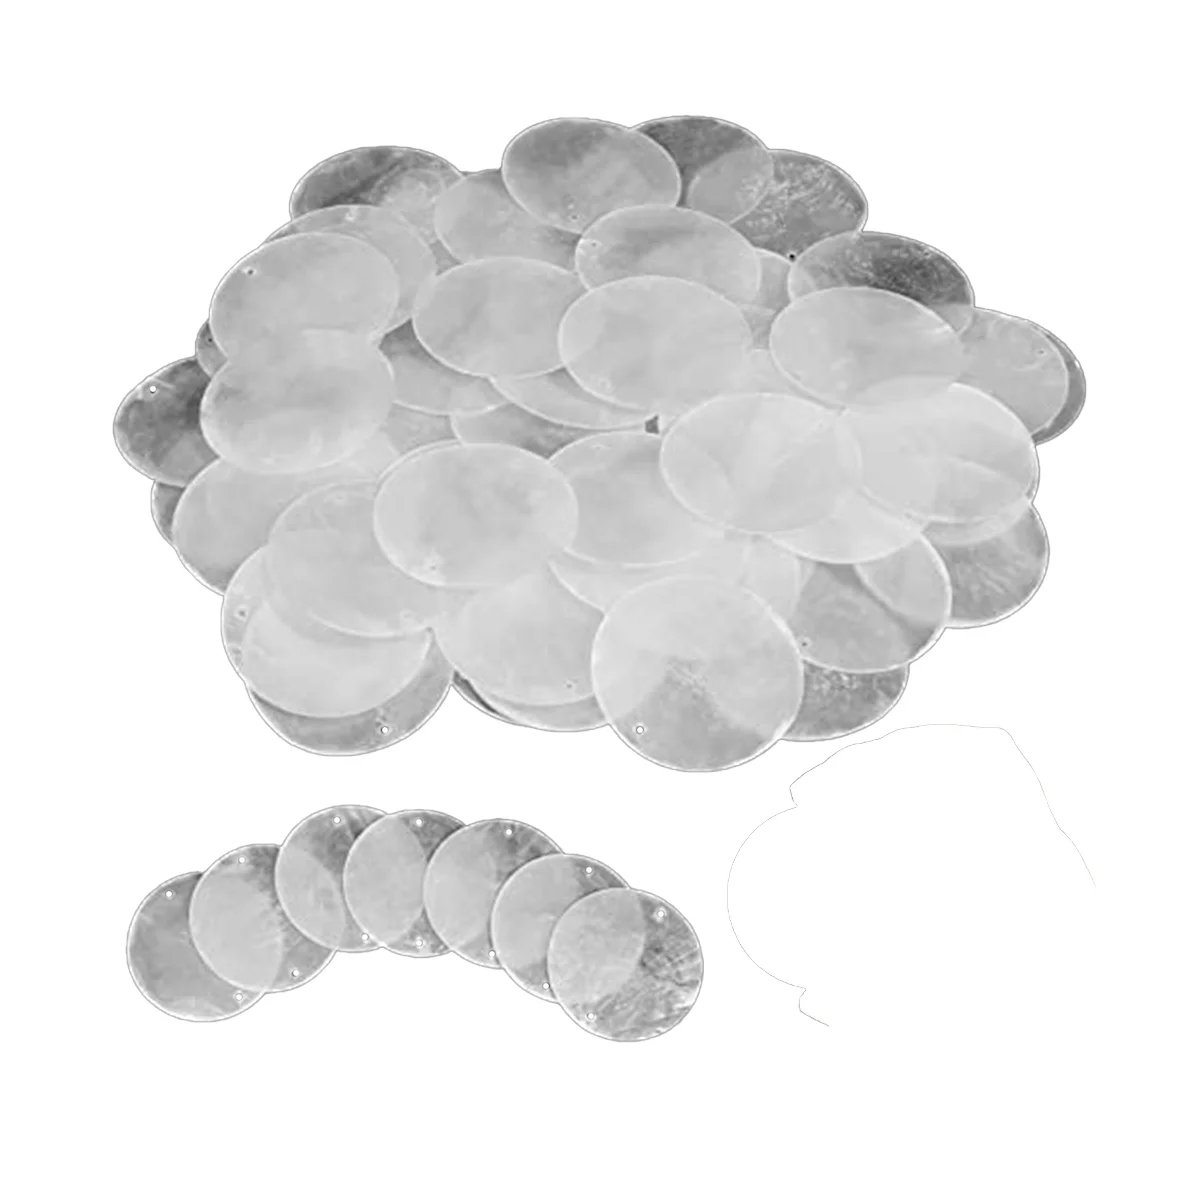 

120 Pcs Round Natural Shells Capiz Sea Shells 2 Inch Oyster Shells for Crafting with 2 Holes Sea Shell Discs